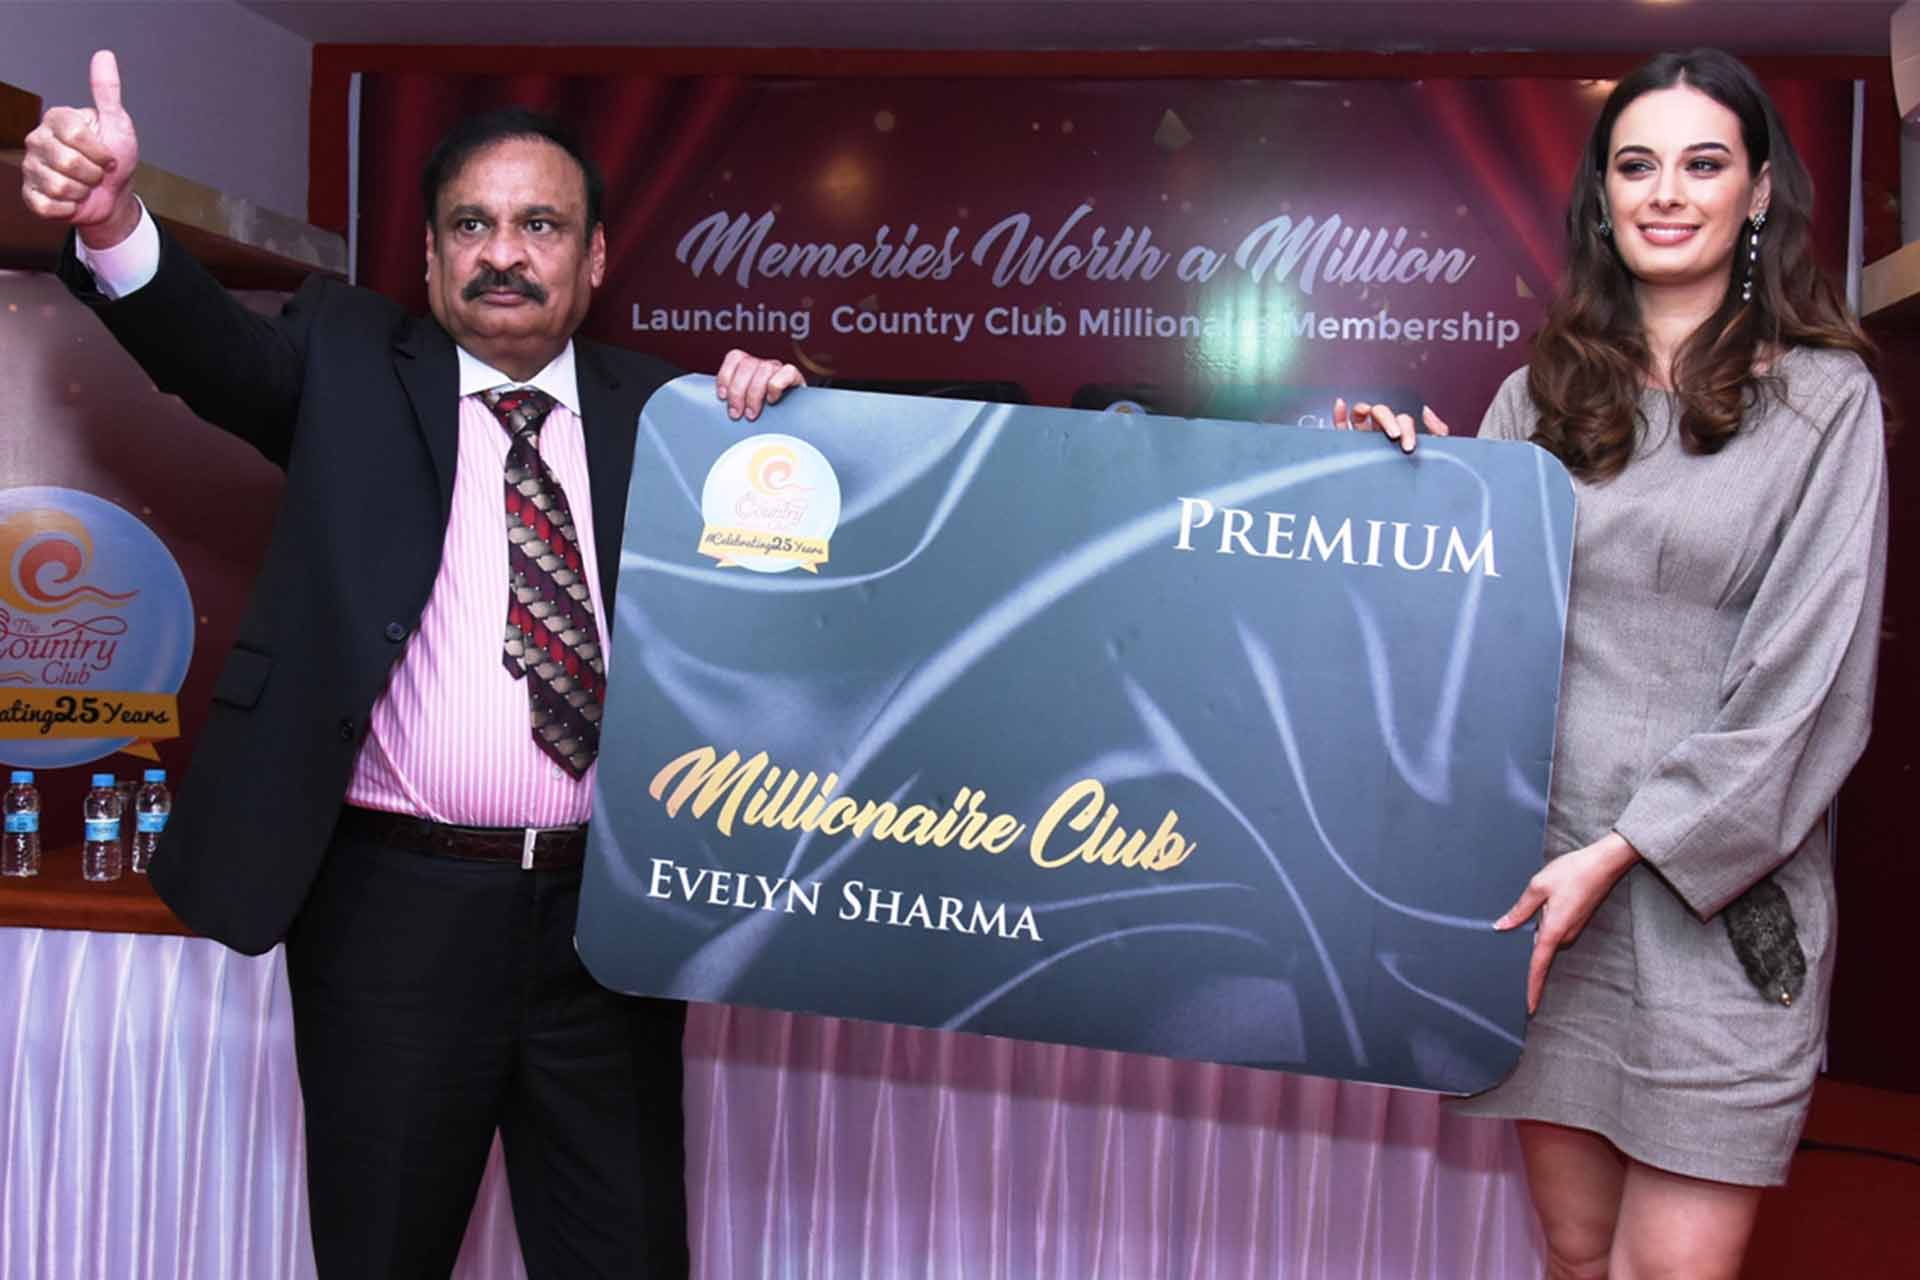 Actress Evelyn Sharma Unveiled Country Club’s New MILLIONAIRES CLUB